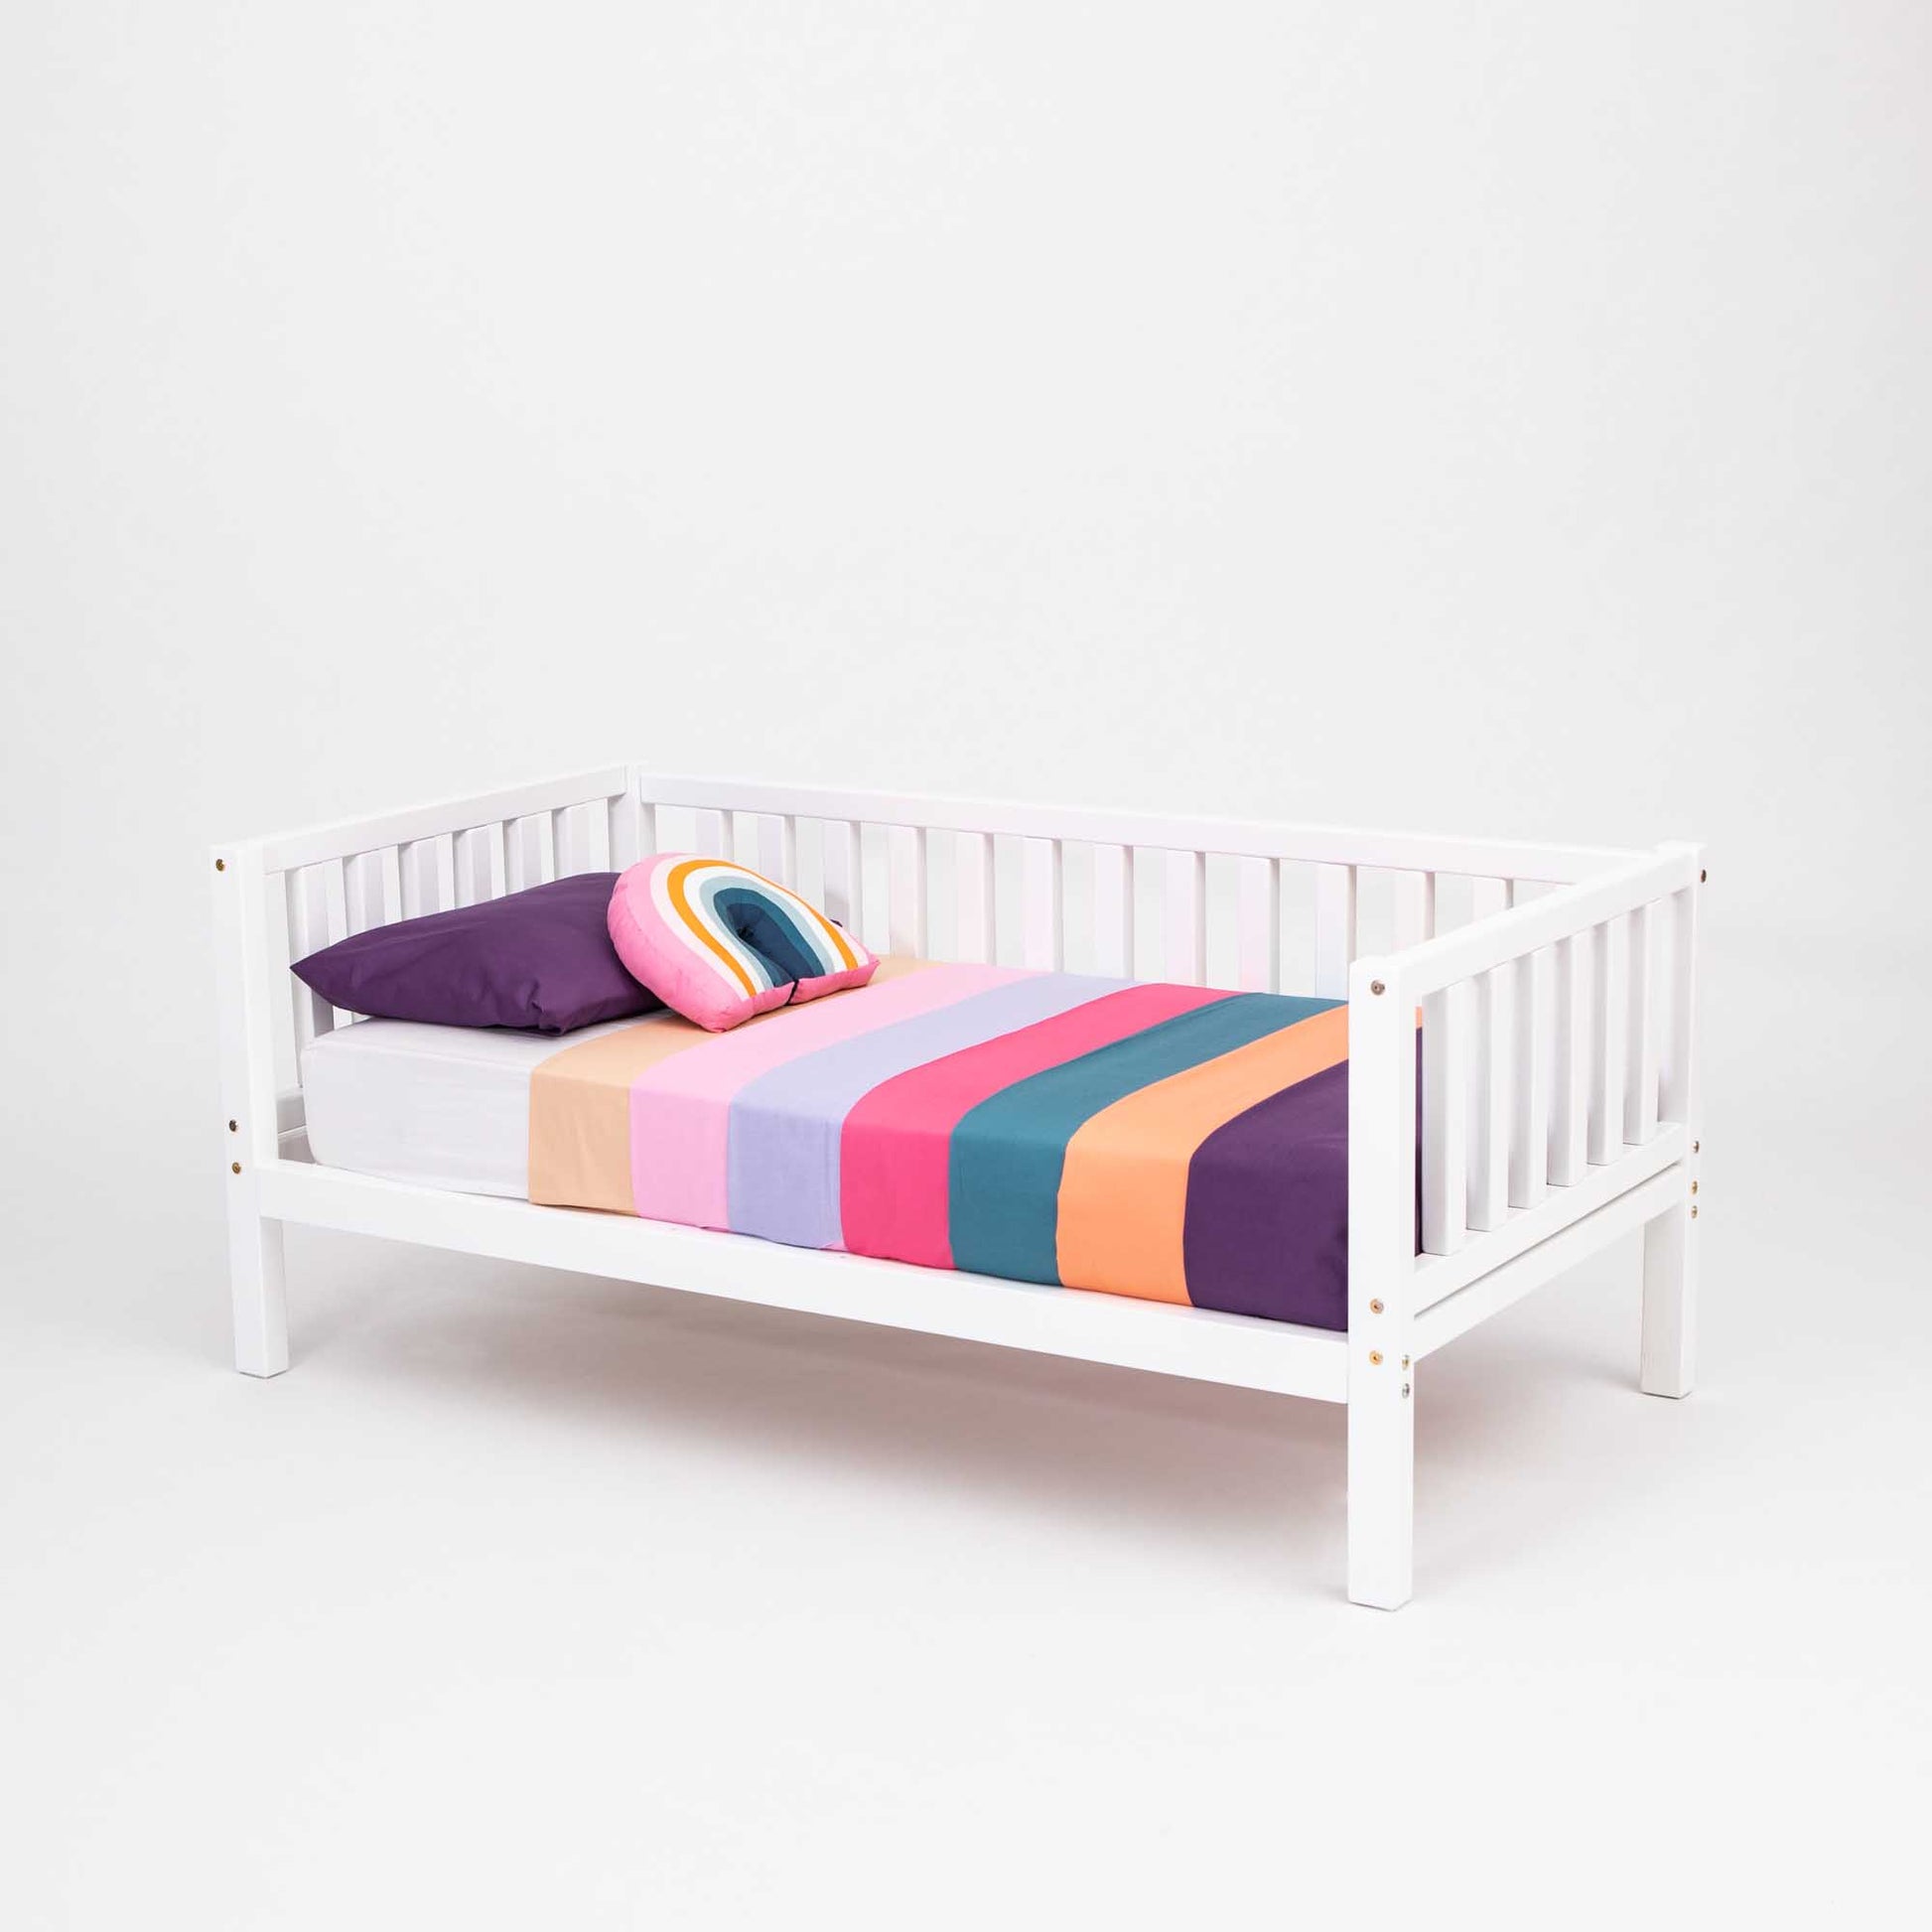 A Sweet Home From Wood Montessori-inspired children's bed made of solid wood, featuring a colorful striped blanket.